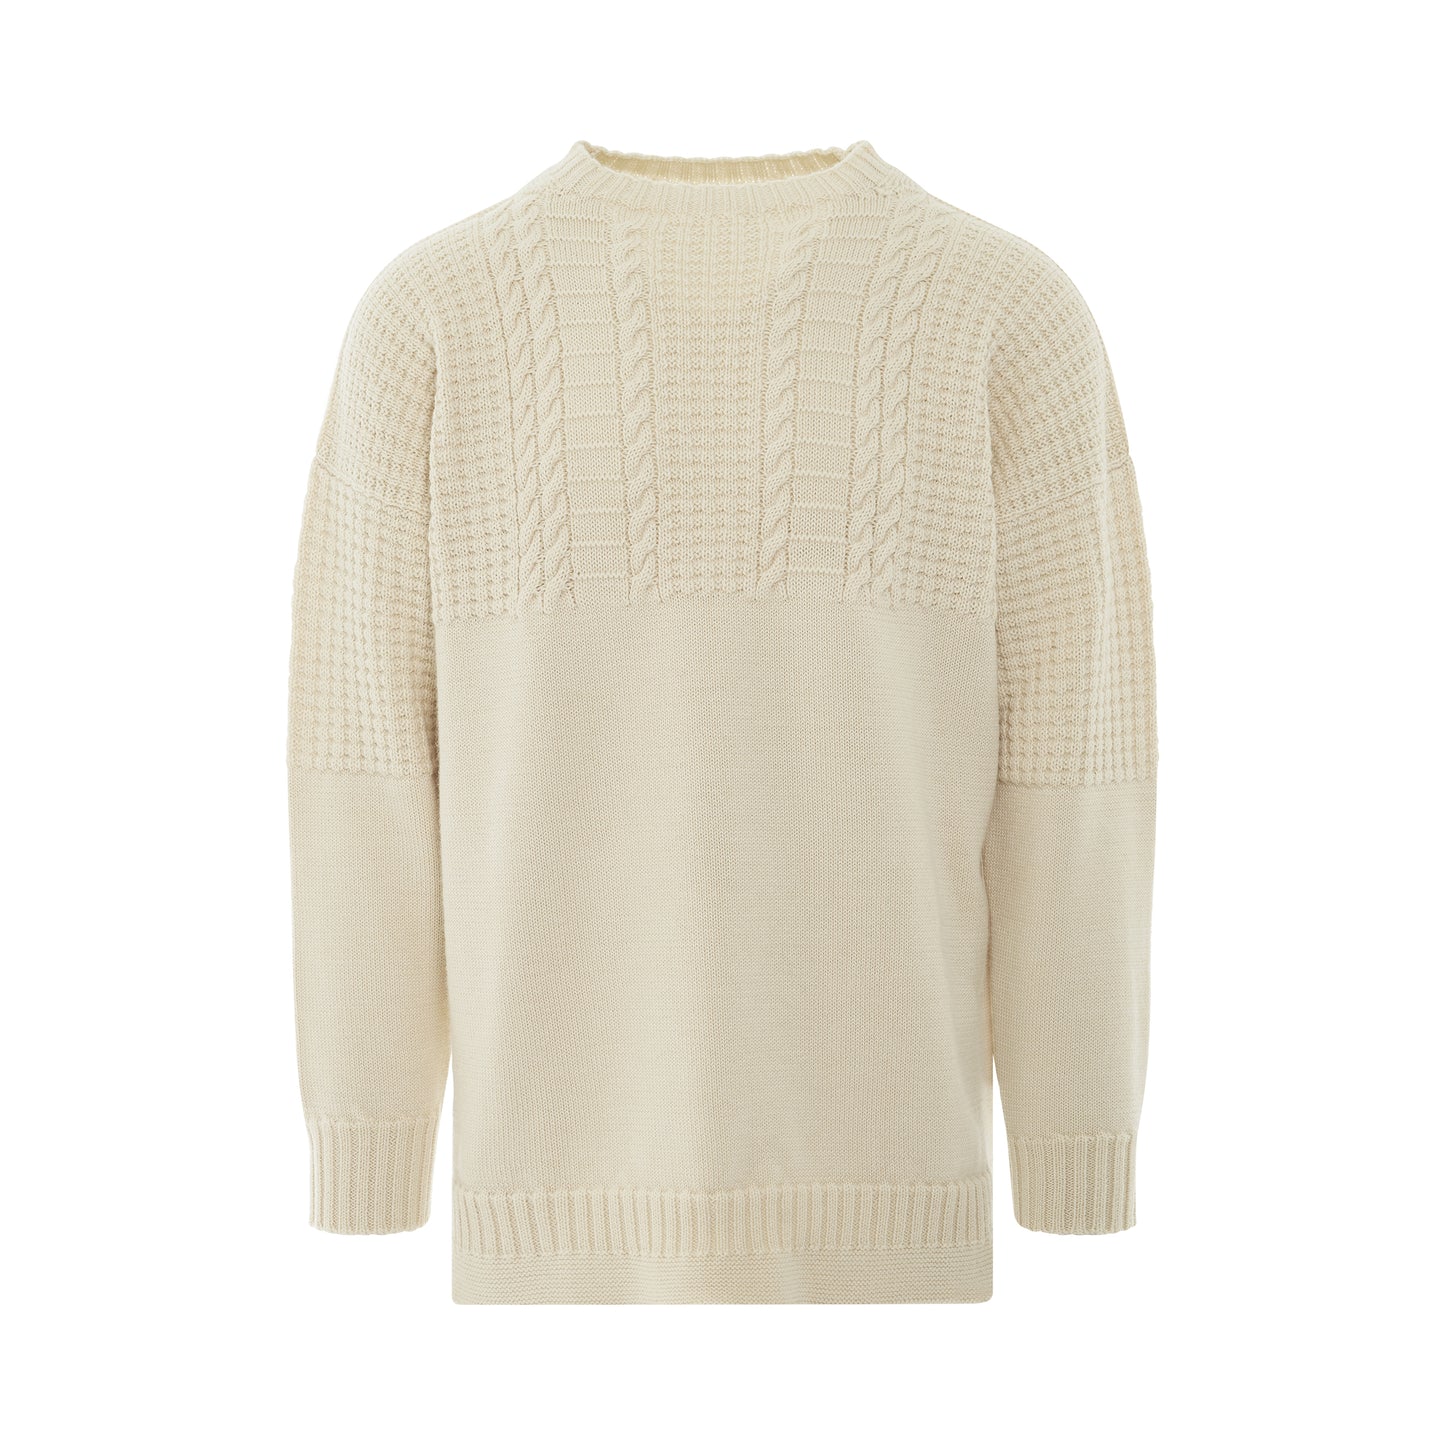 Knit Long Sleeve Sweater in Off White